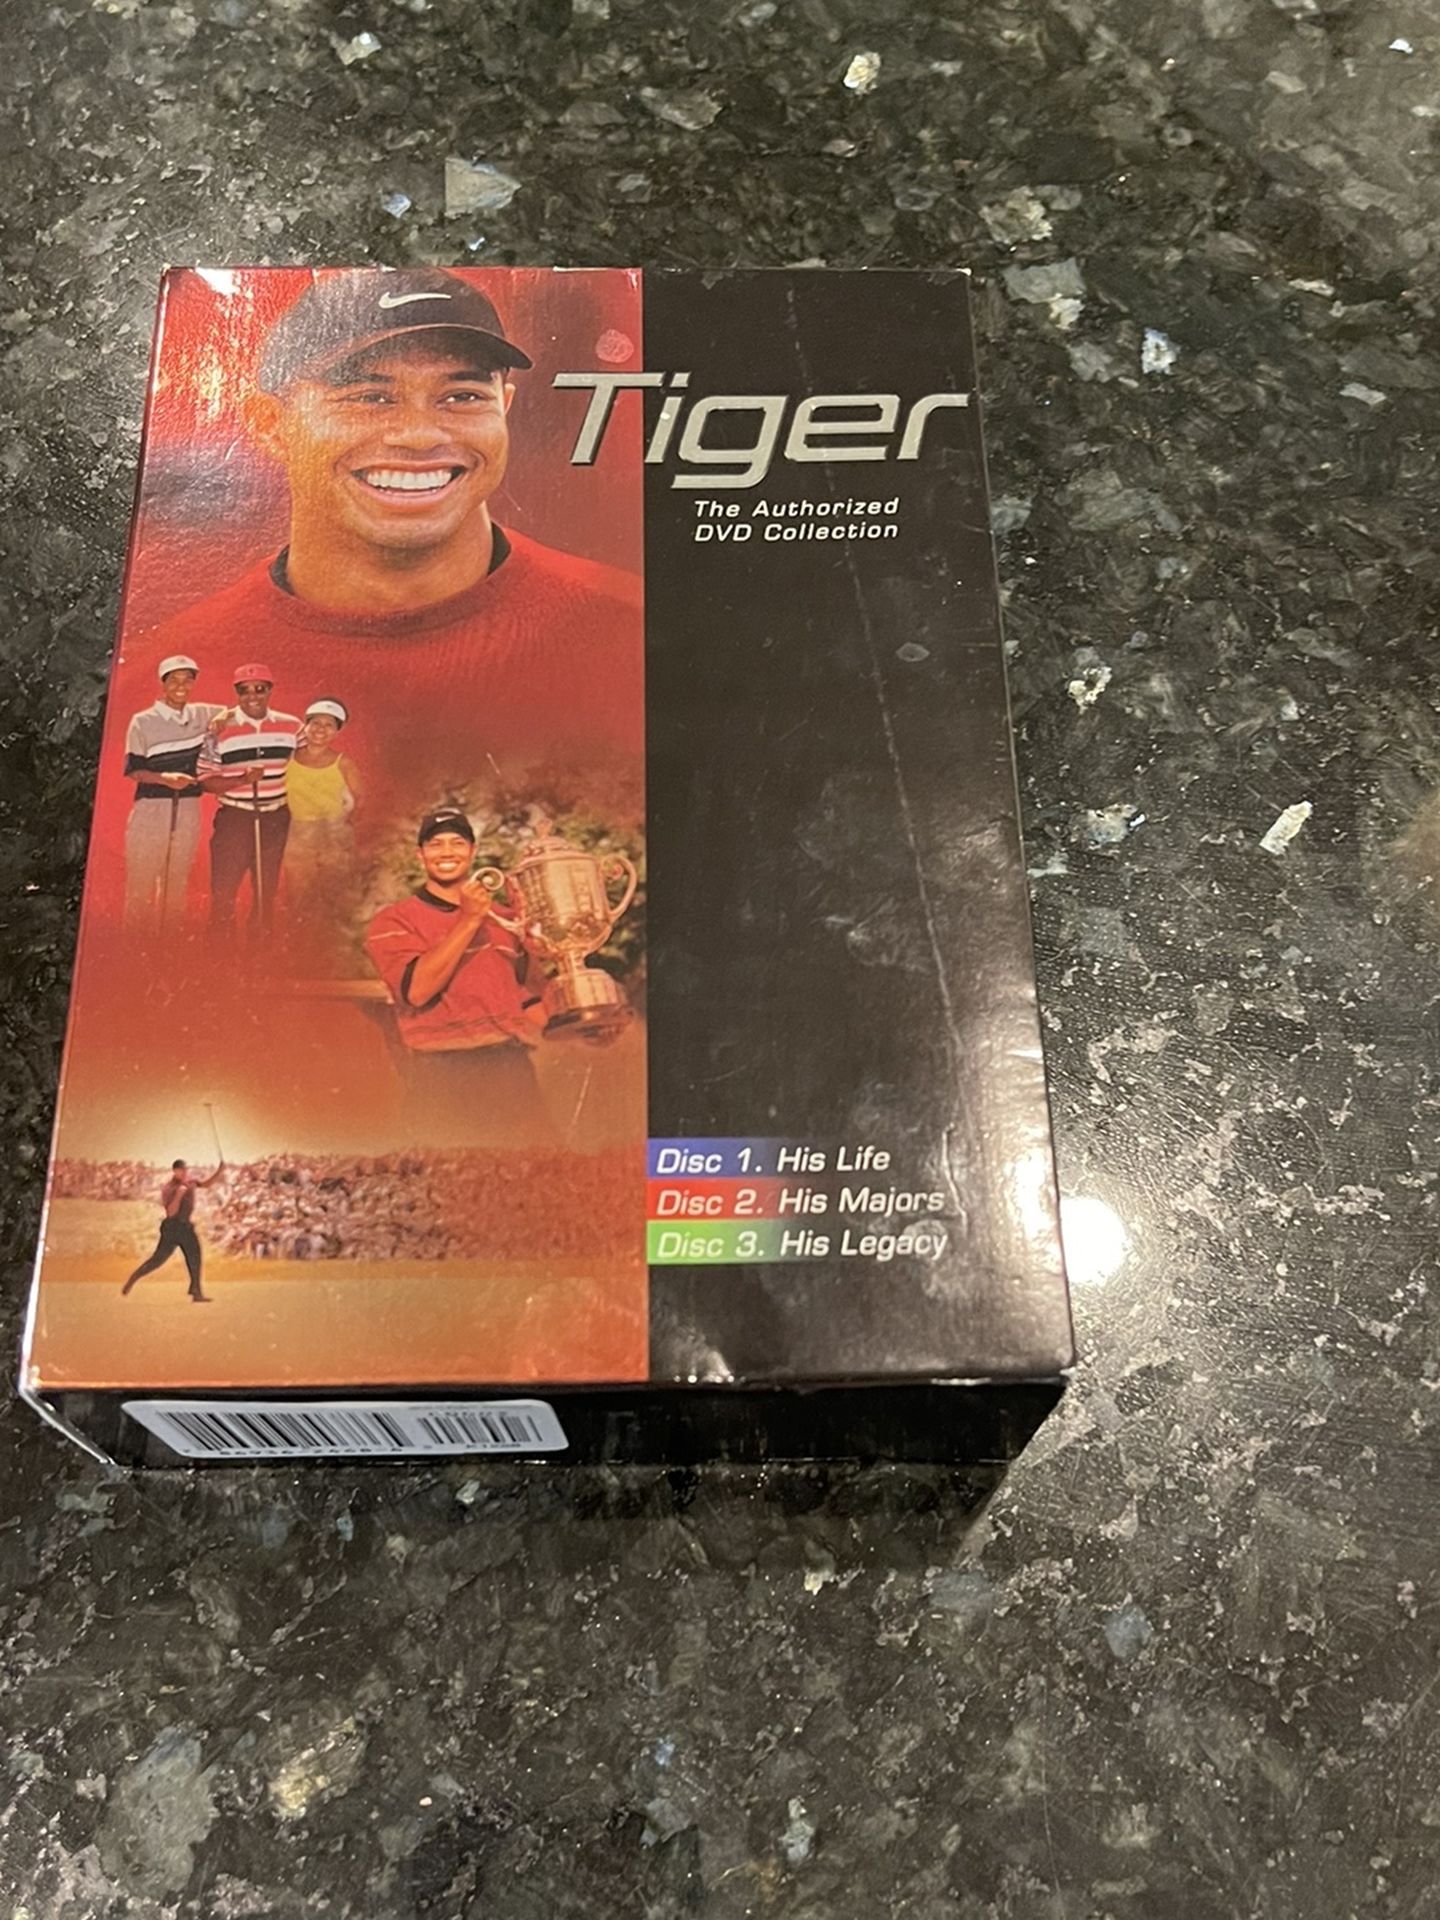 Tiger The Authorized DVD Collection 3 Discs